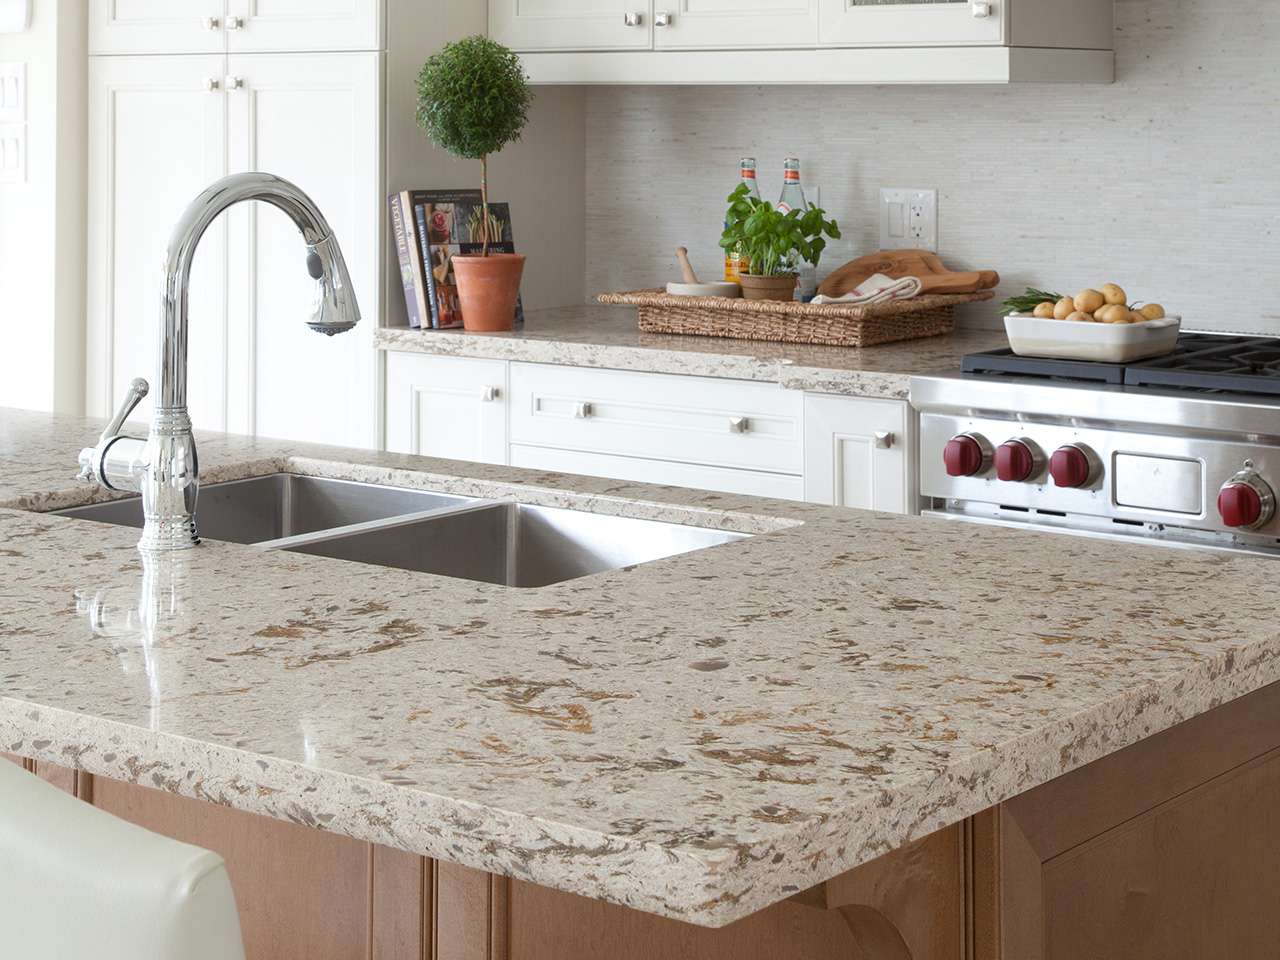 Windermere countertop used on a kitchen island.